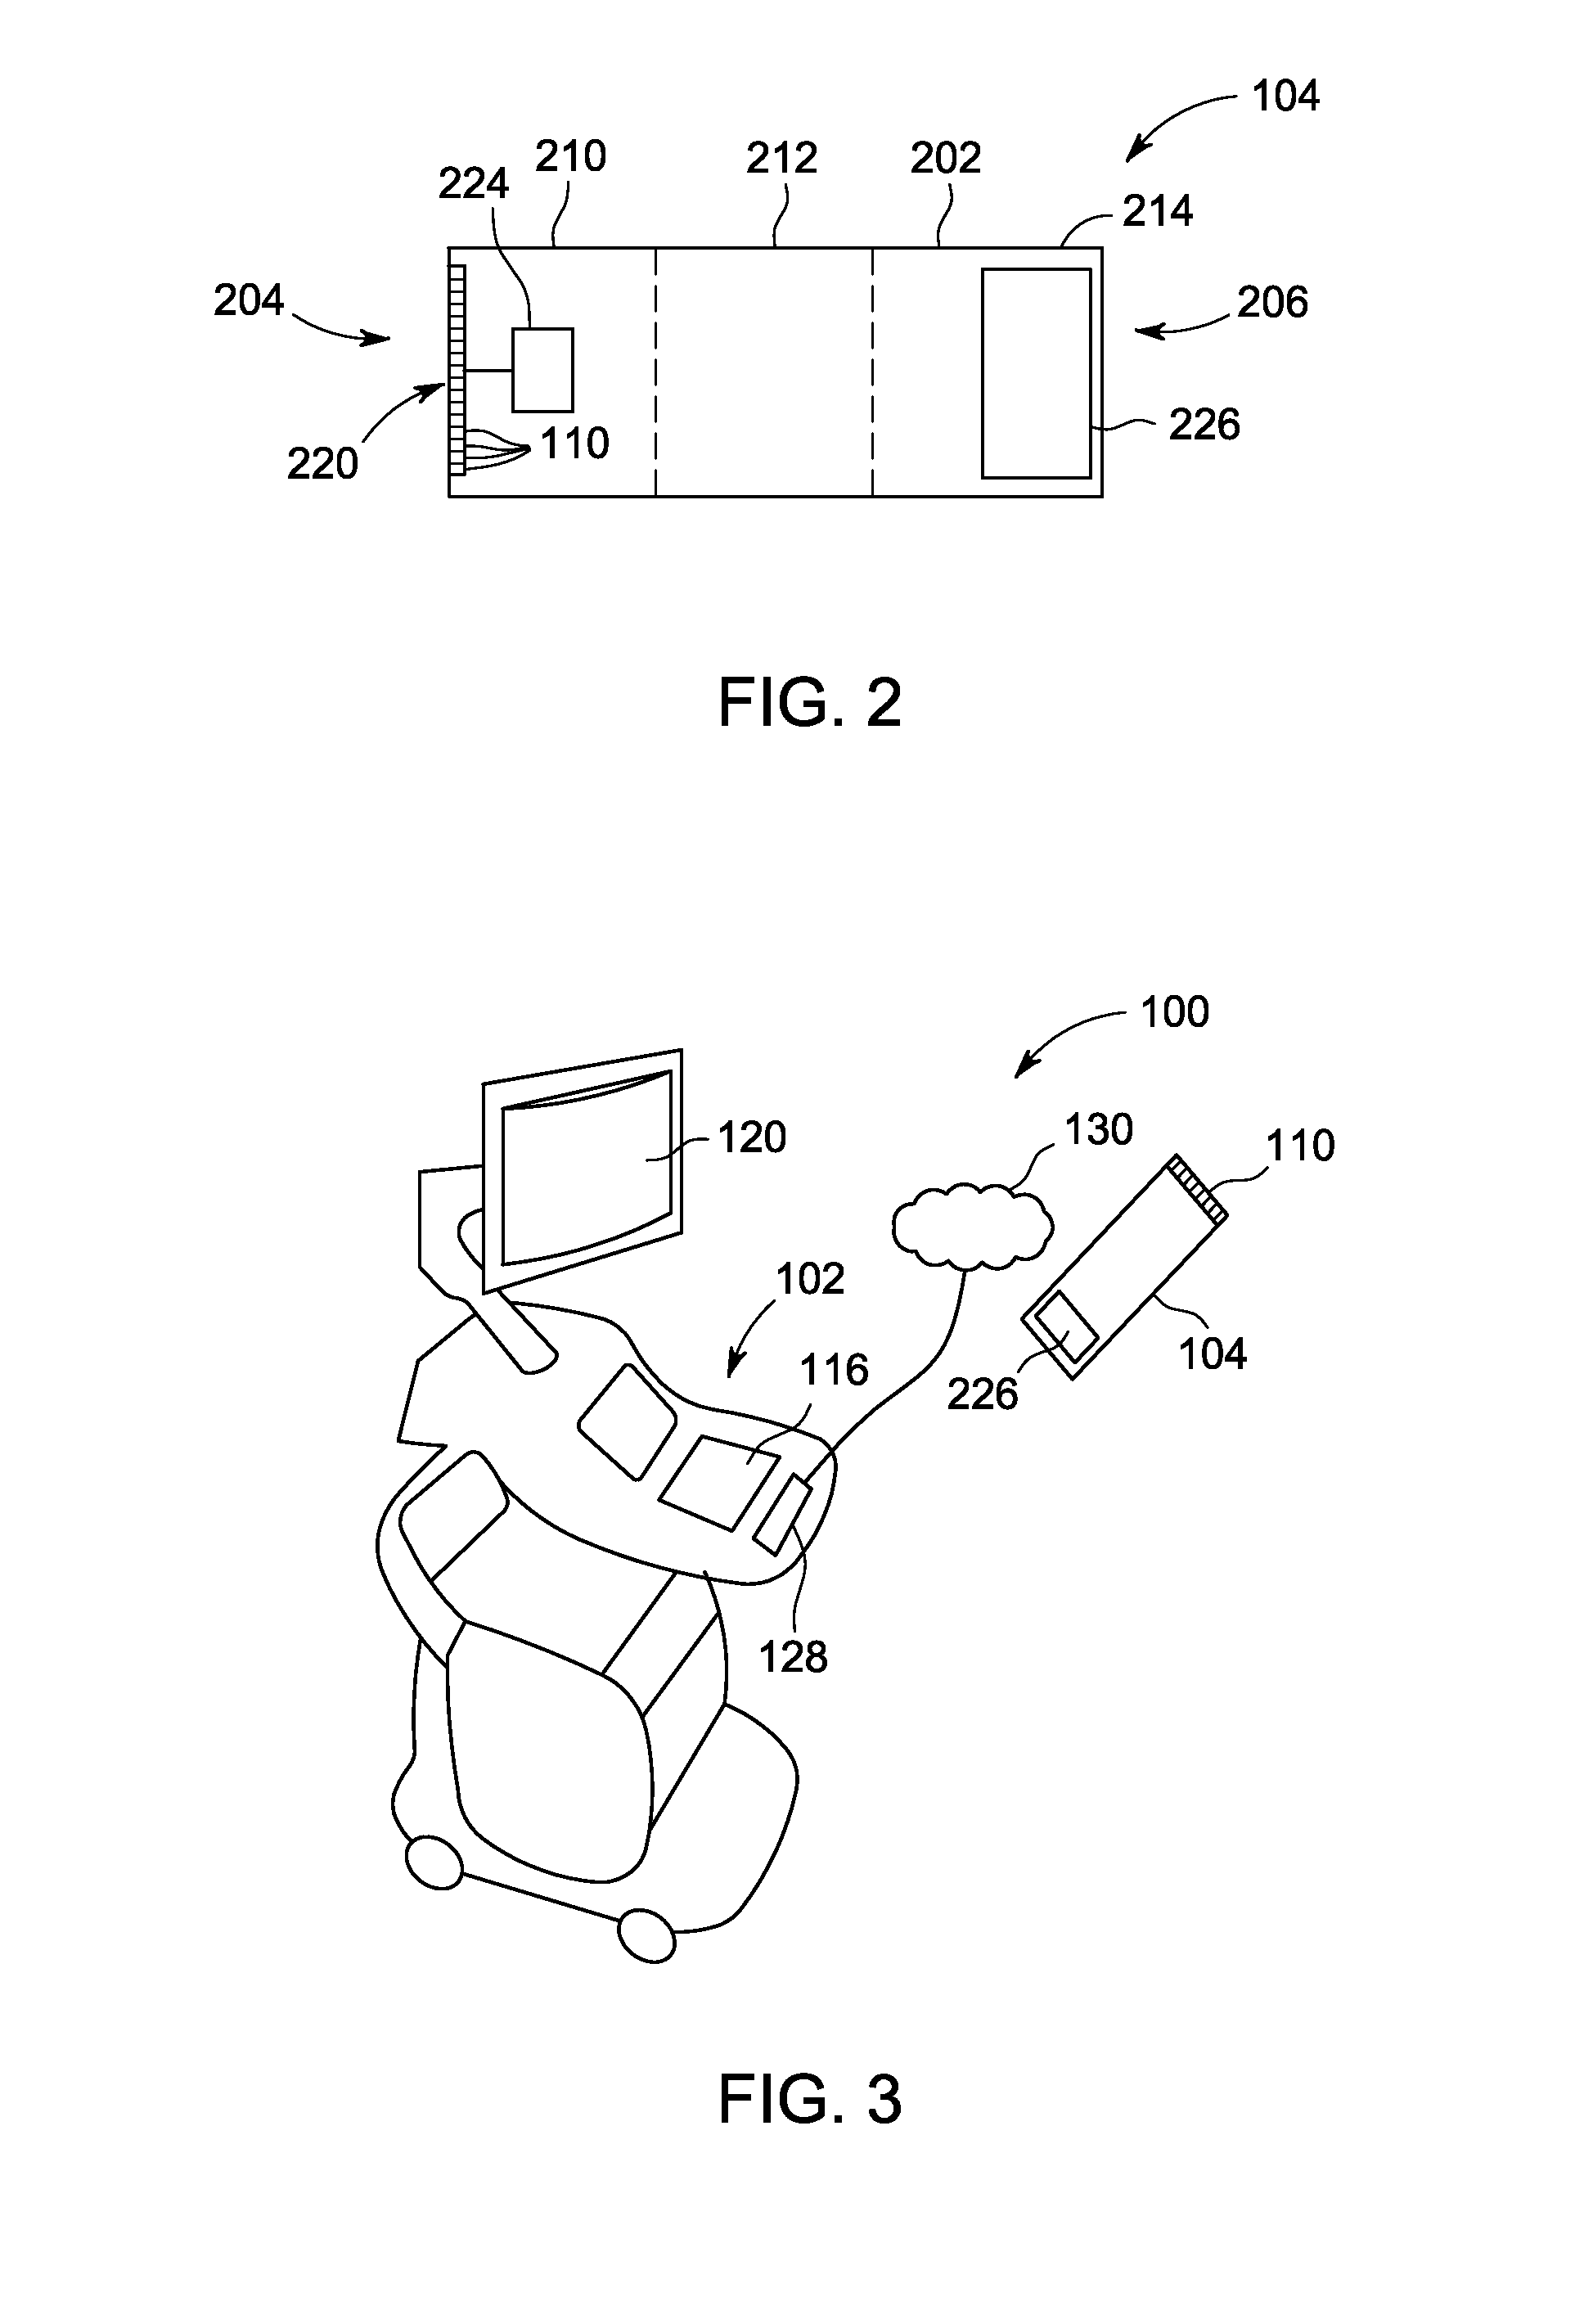 System and Method for Wireless Ultrasound Probe Pairing